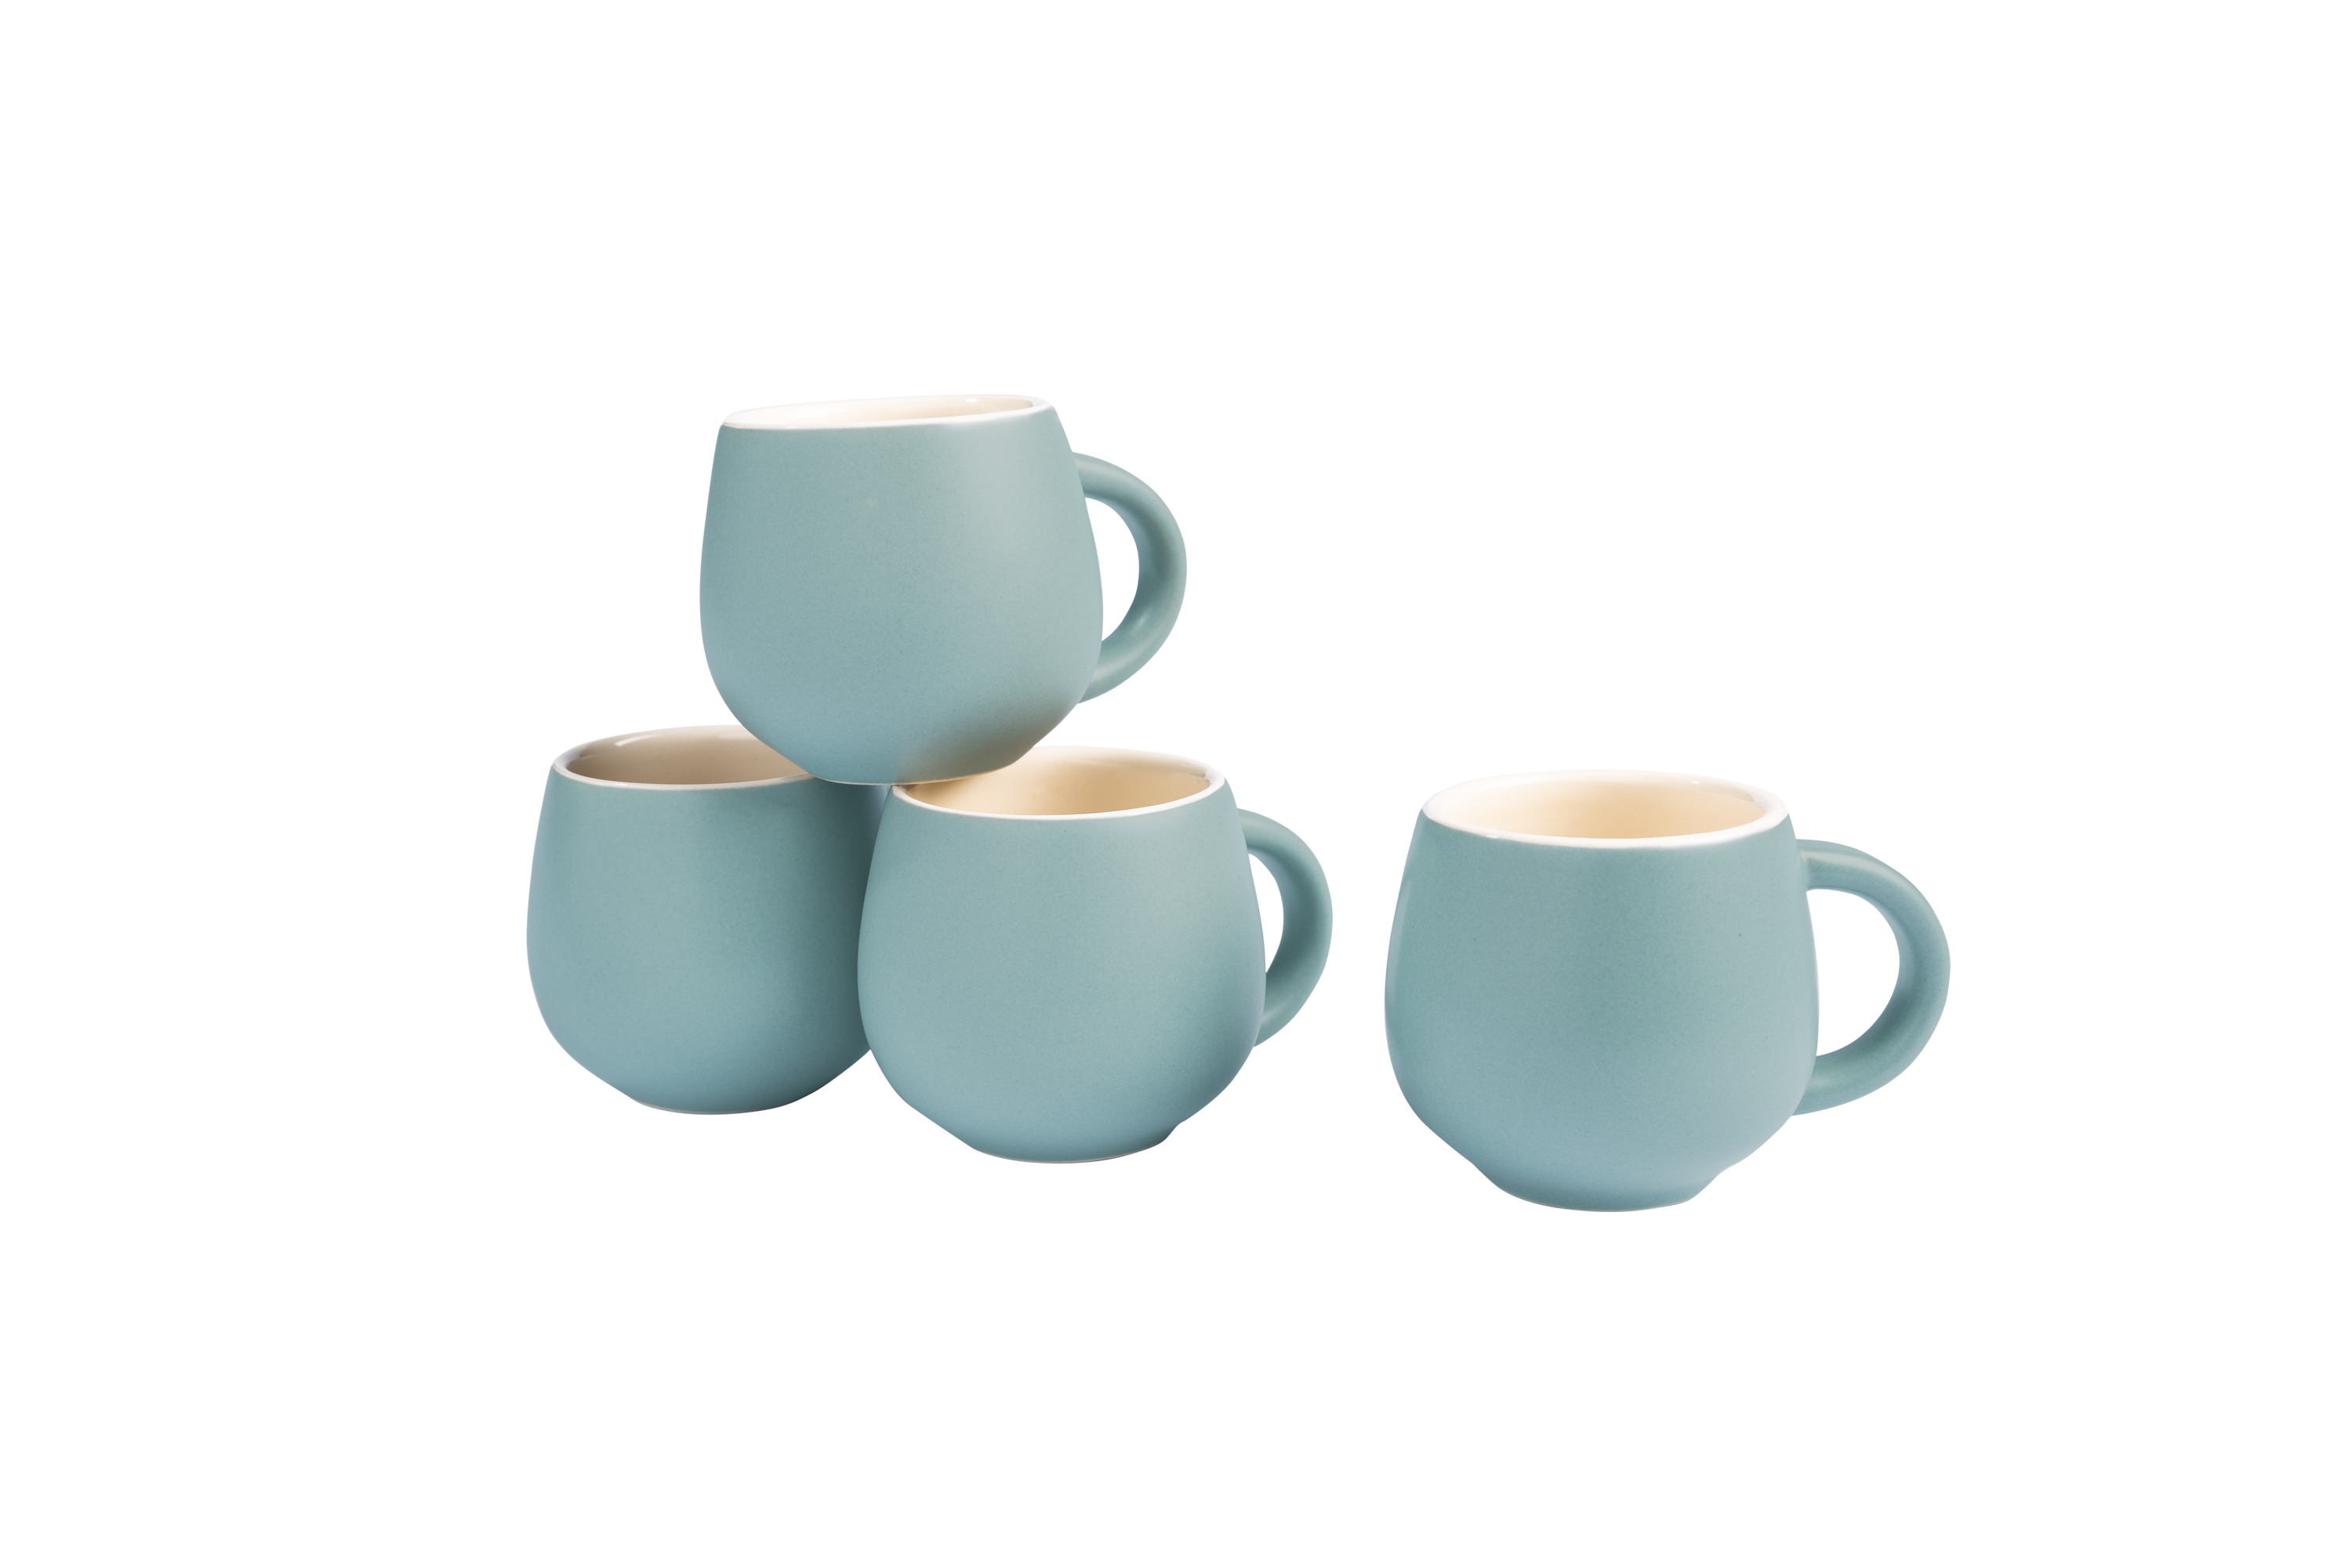 Mehrere Sia Mugs in der Farbe pastelblue